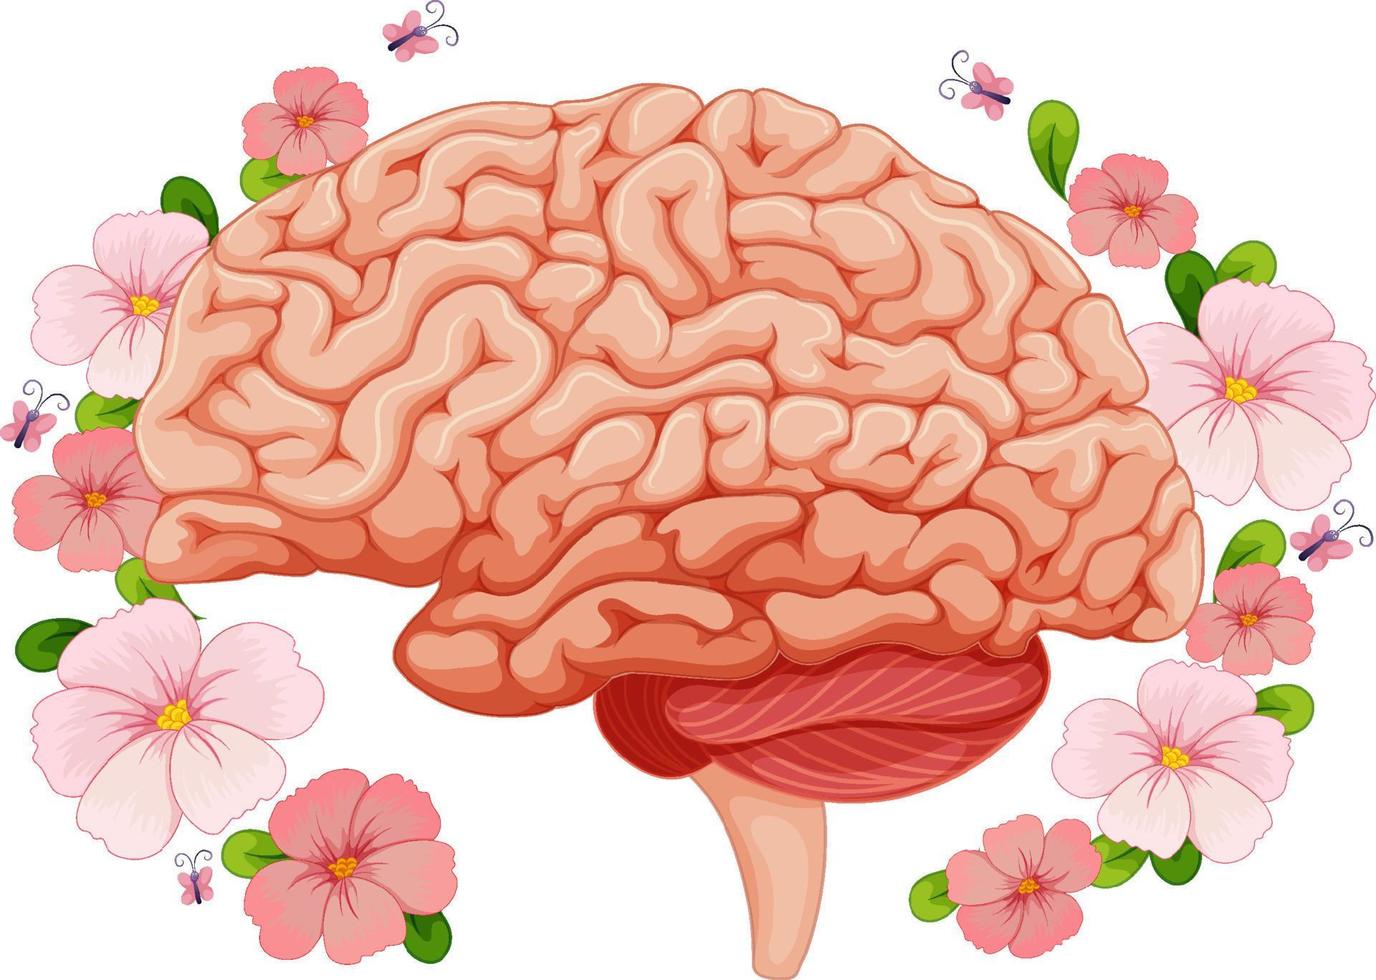 Human brain with pink flowers around vector